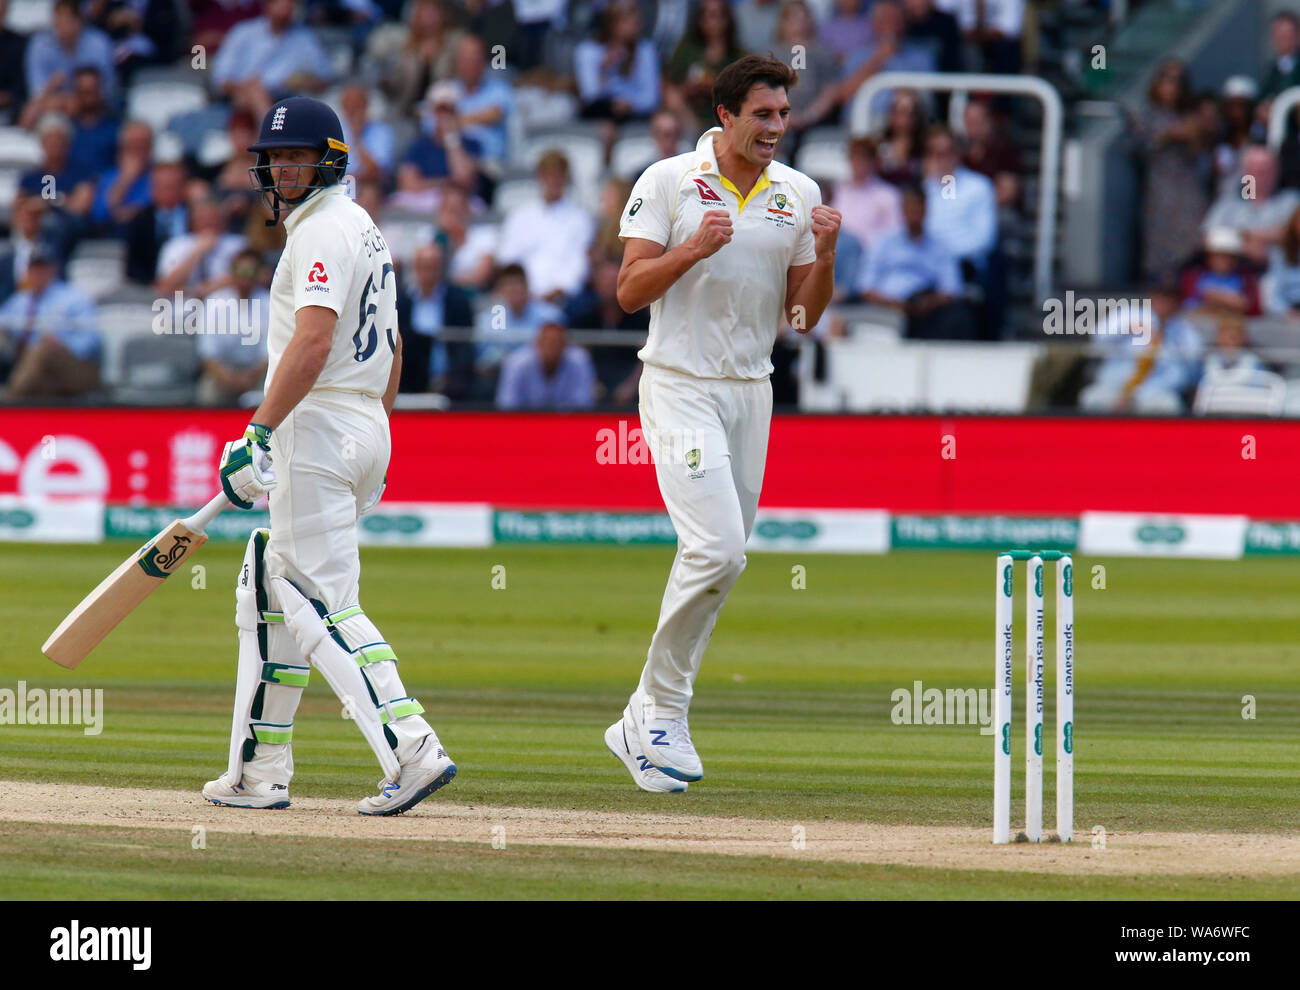 London, UK. 18 August 2019. Pat Cummins of Australia celebrates the catch of Jos Buttler of England by au28 during play on the 5th day  of the second Ashes cricket Test match between England and Australia at Lord's Cricket ground in London, England on August 18, 2019 Credit: Action Foto Sport/Alamy Live News Stock Photo